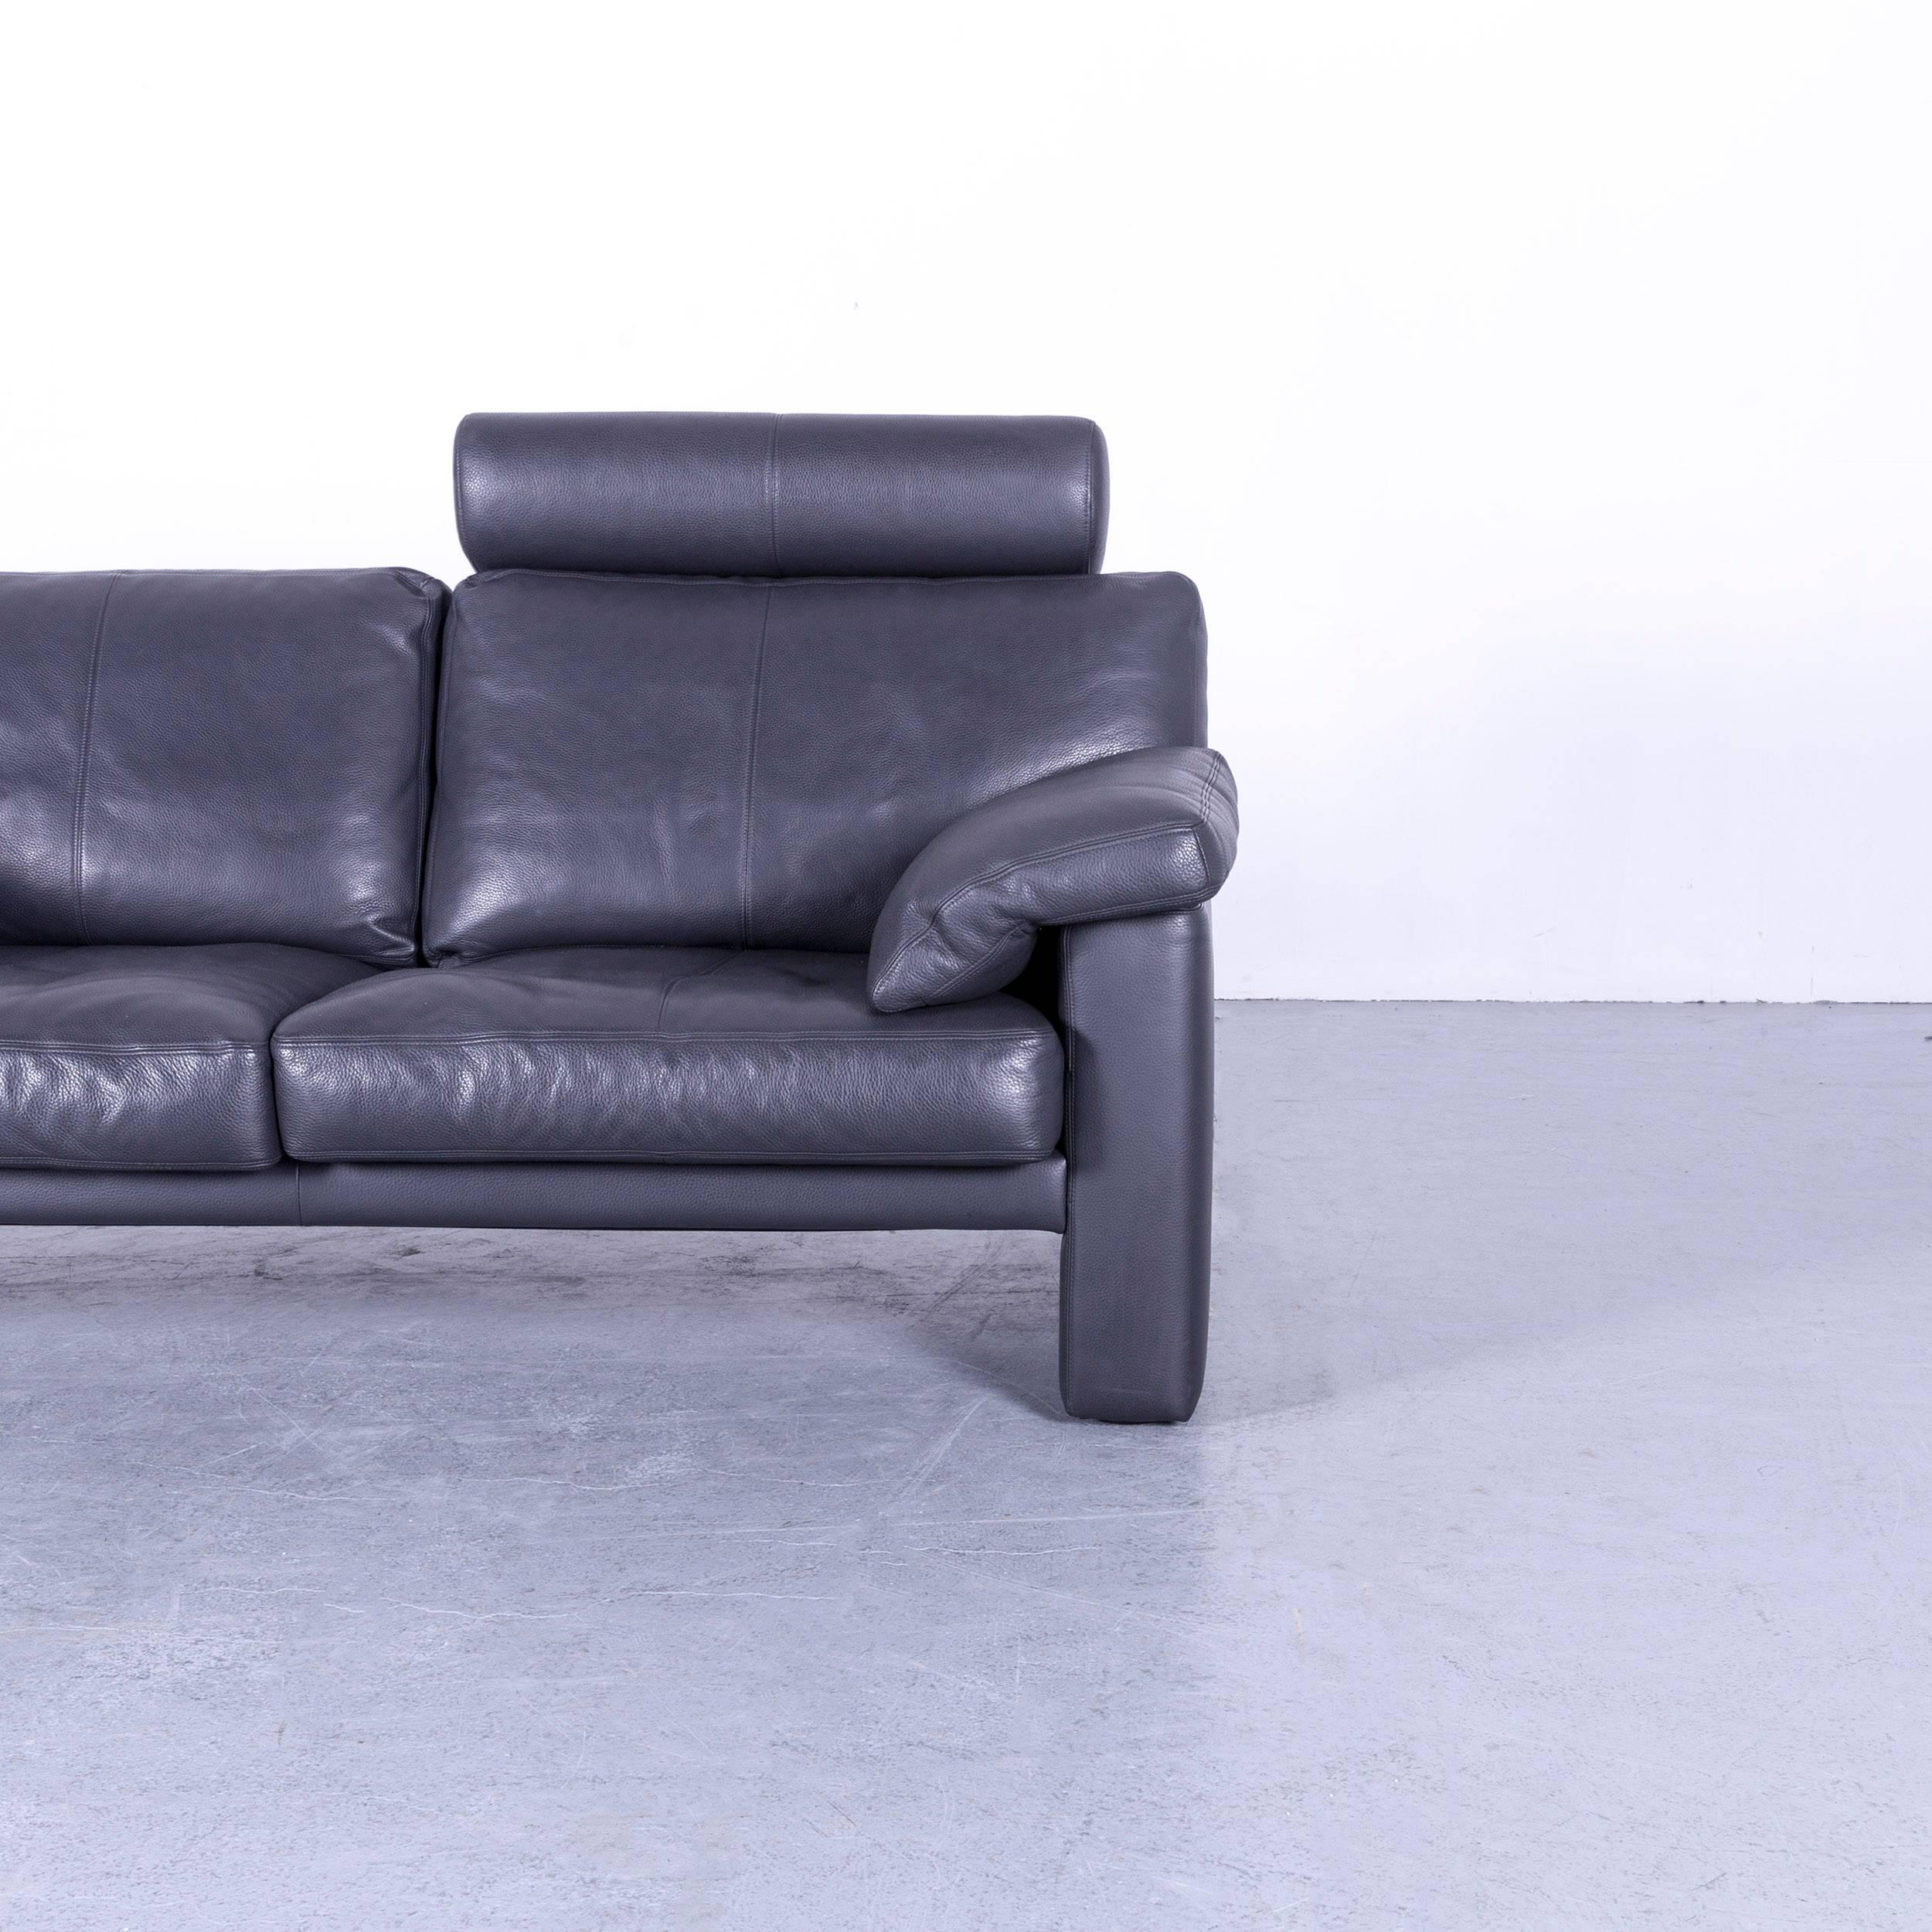 Erpo CL 300 Leather Sofa Grey Two-Seat Couch In Good Condition For Sale In Cologne, DE